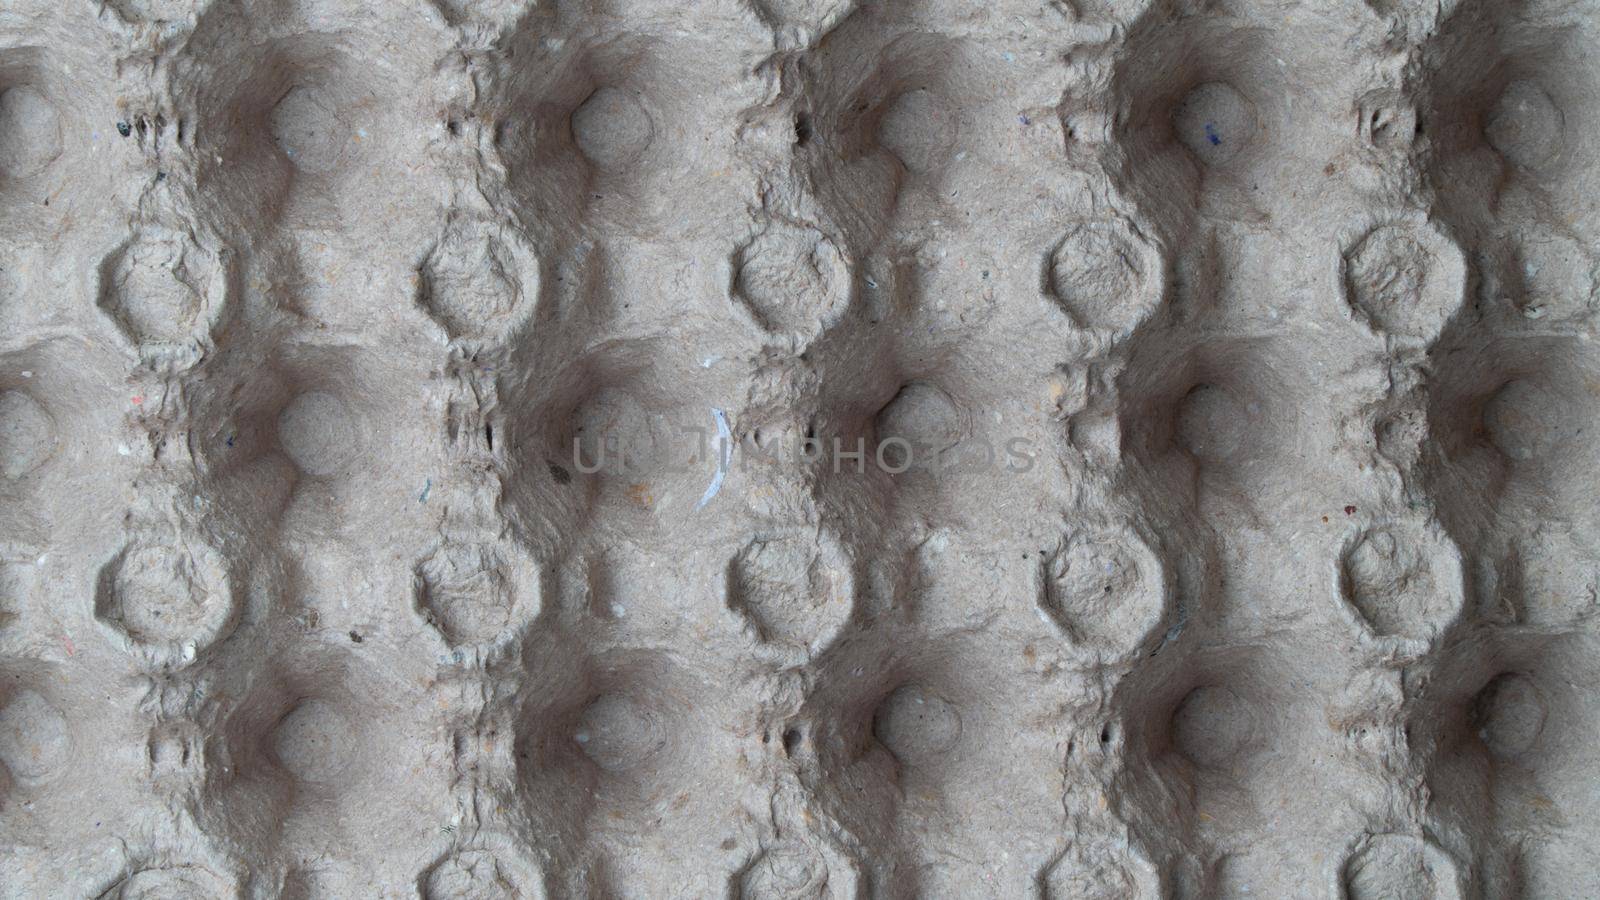 close-up egg lattice rack background three-dimensional pattern with bulges